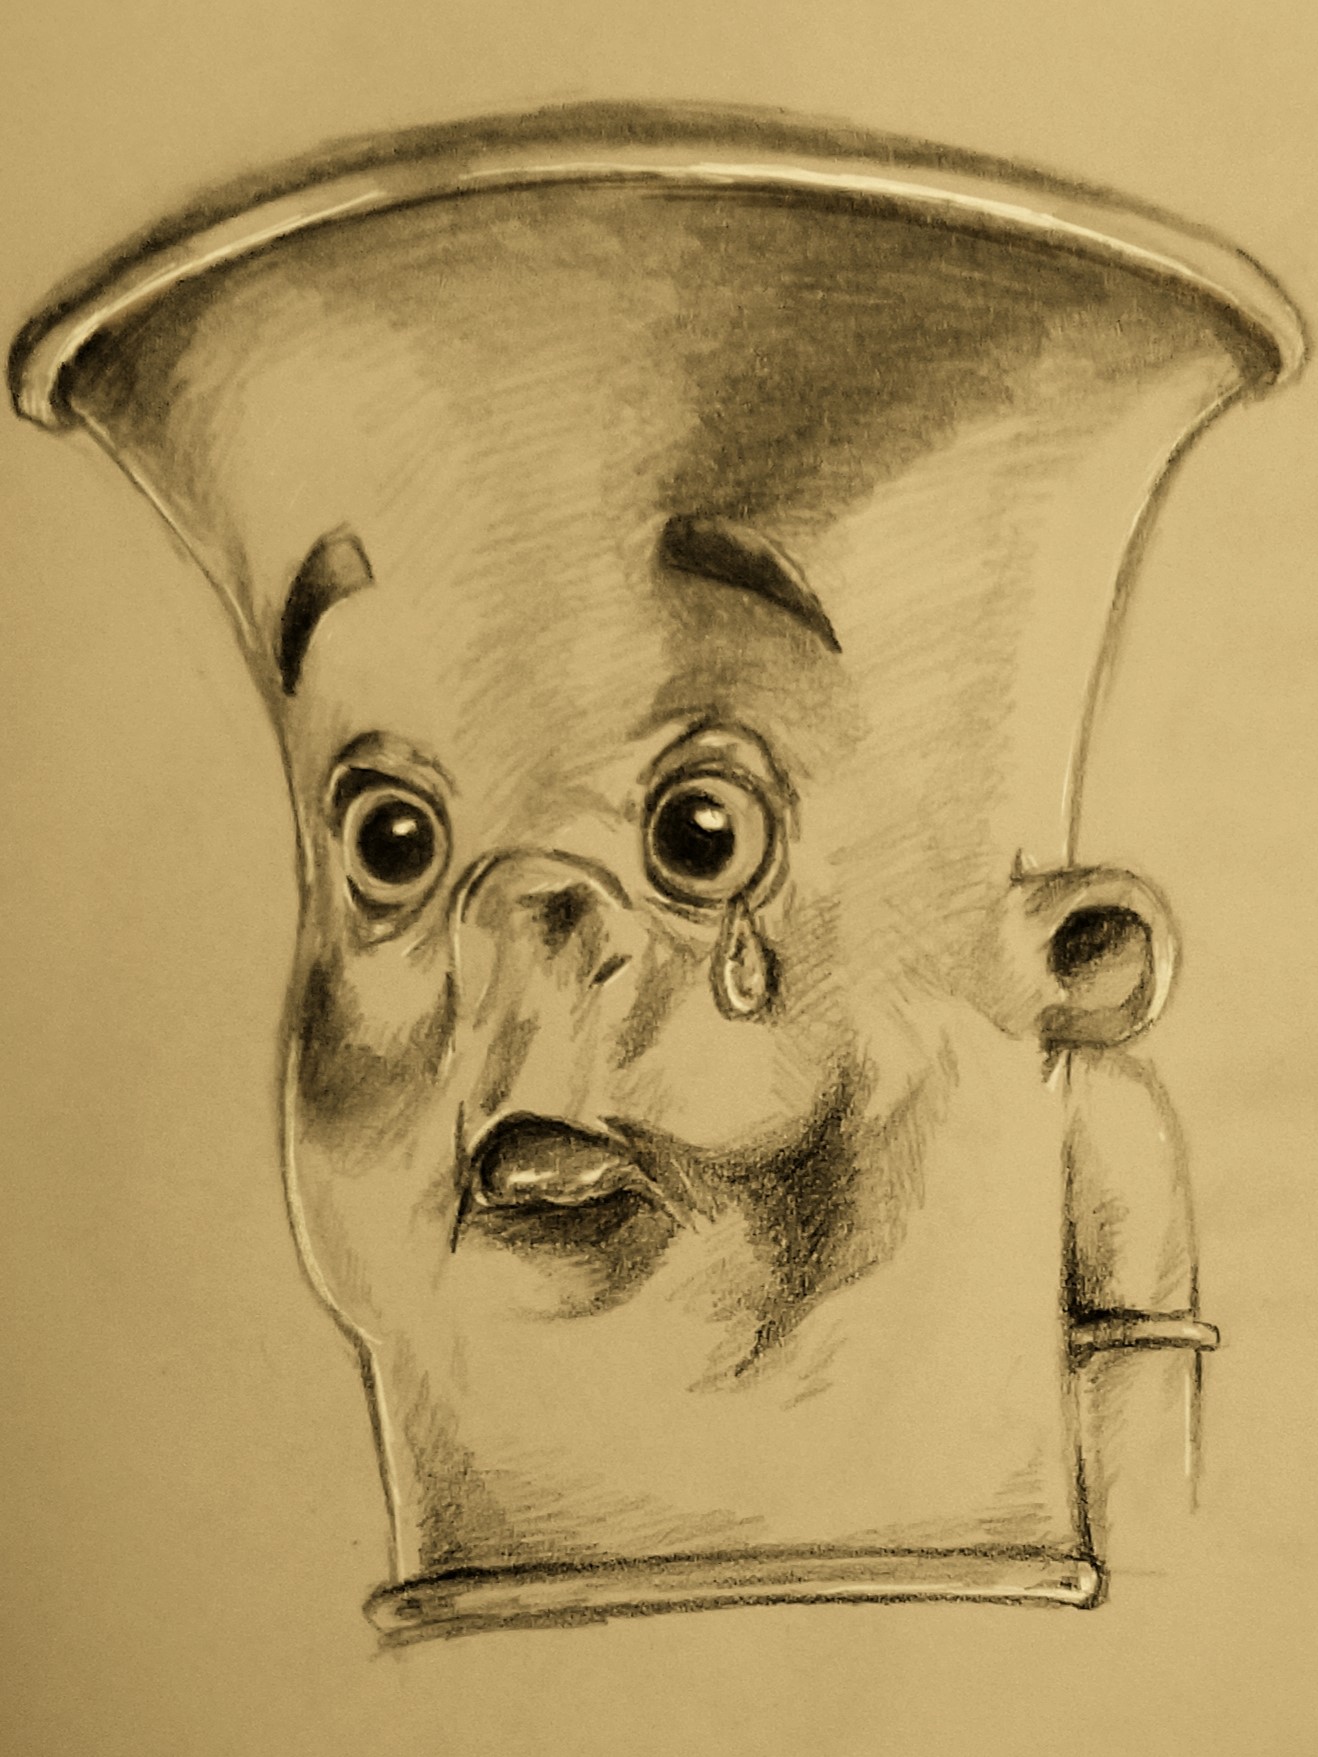 Study of George Pal's Tubby the Tuba (2020)